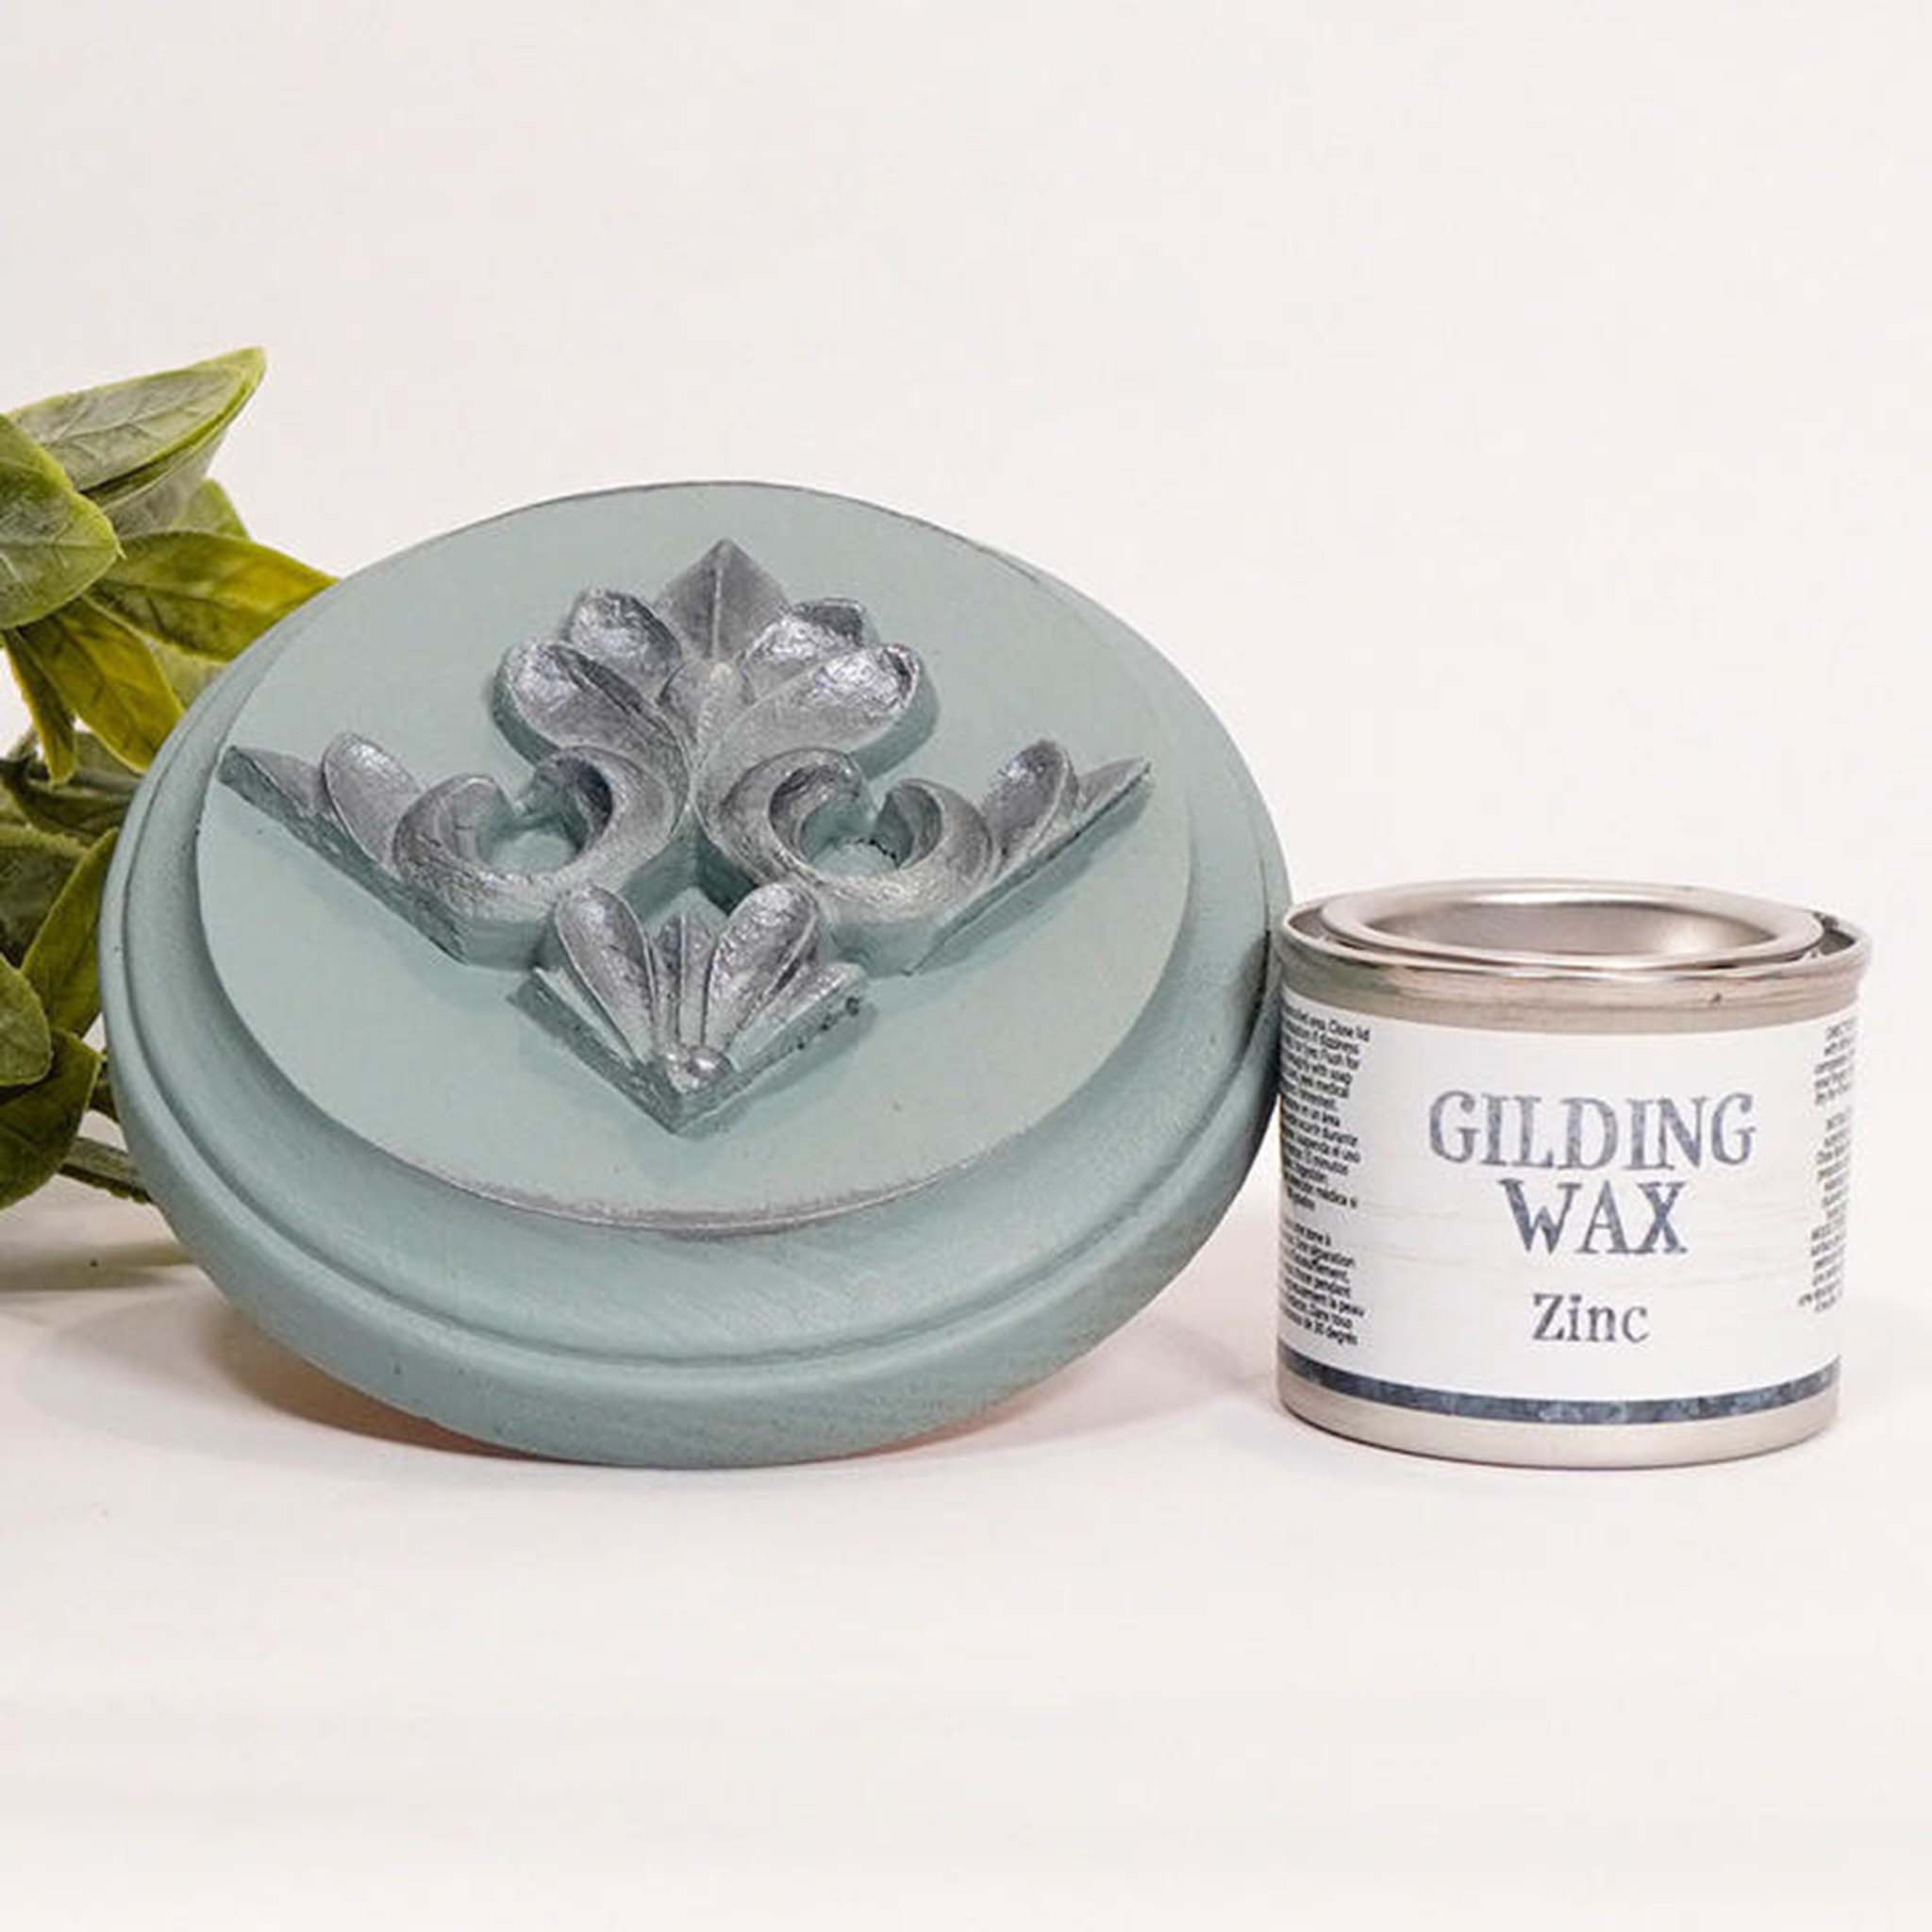 A can of Dixie Belle's Zinc Gilding wax is next to a light blue painted round wood sample. The wood sample has an ornate silicone mold casting that features the zinc gilding wax on it.